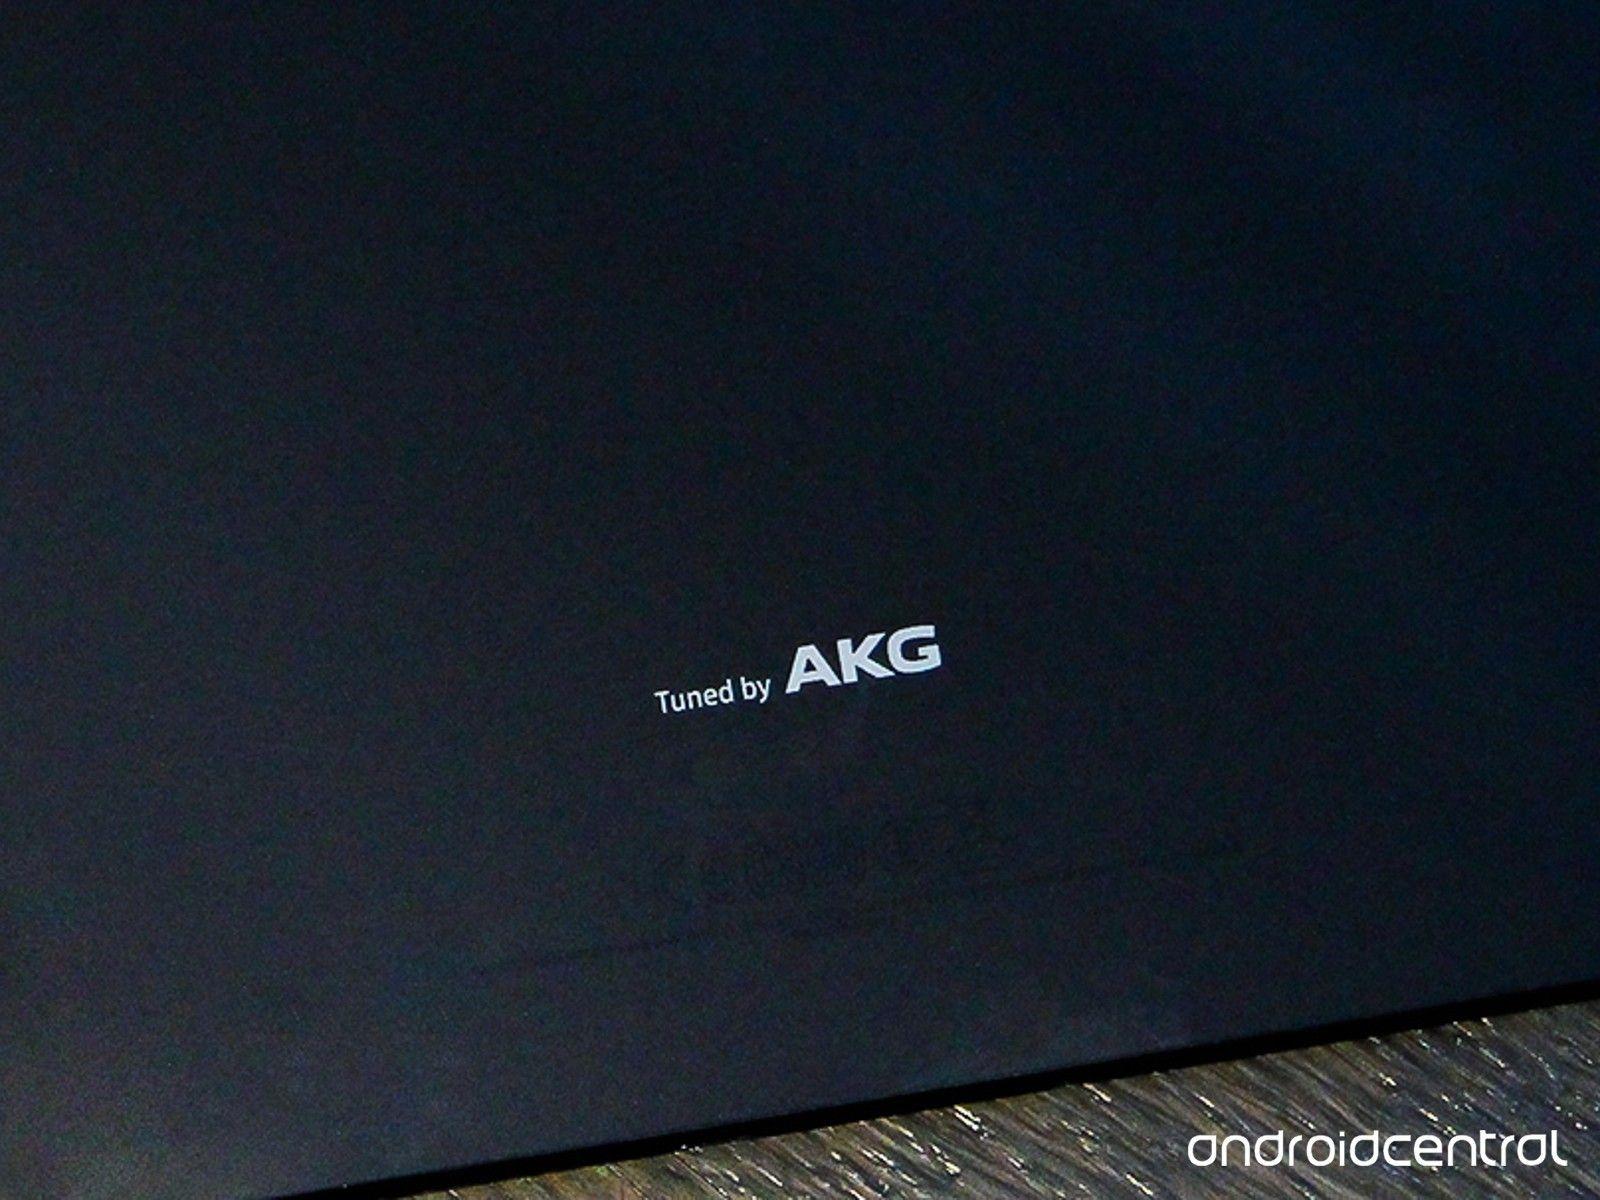 AKG Logo - Samsung Galaxy S8 expected to come with AKG headphones, audio tuning ...